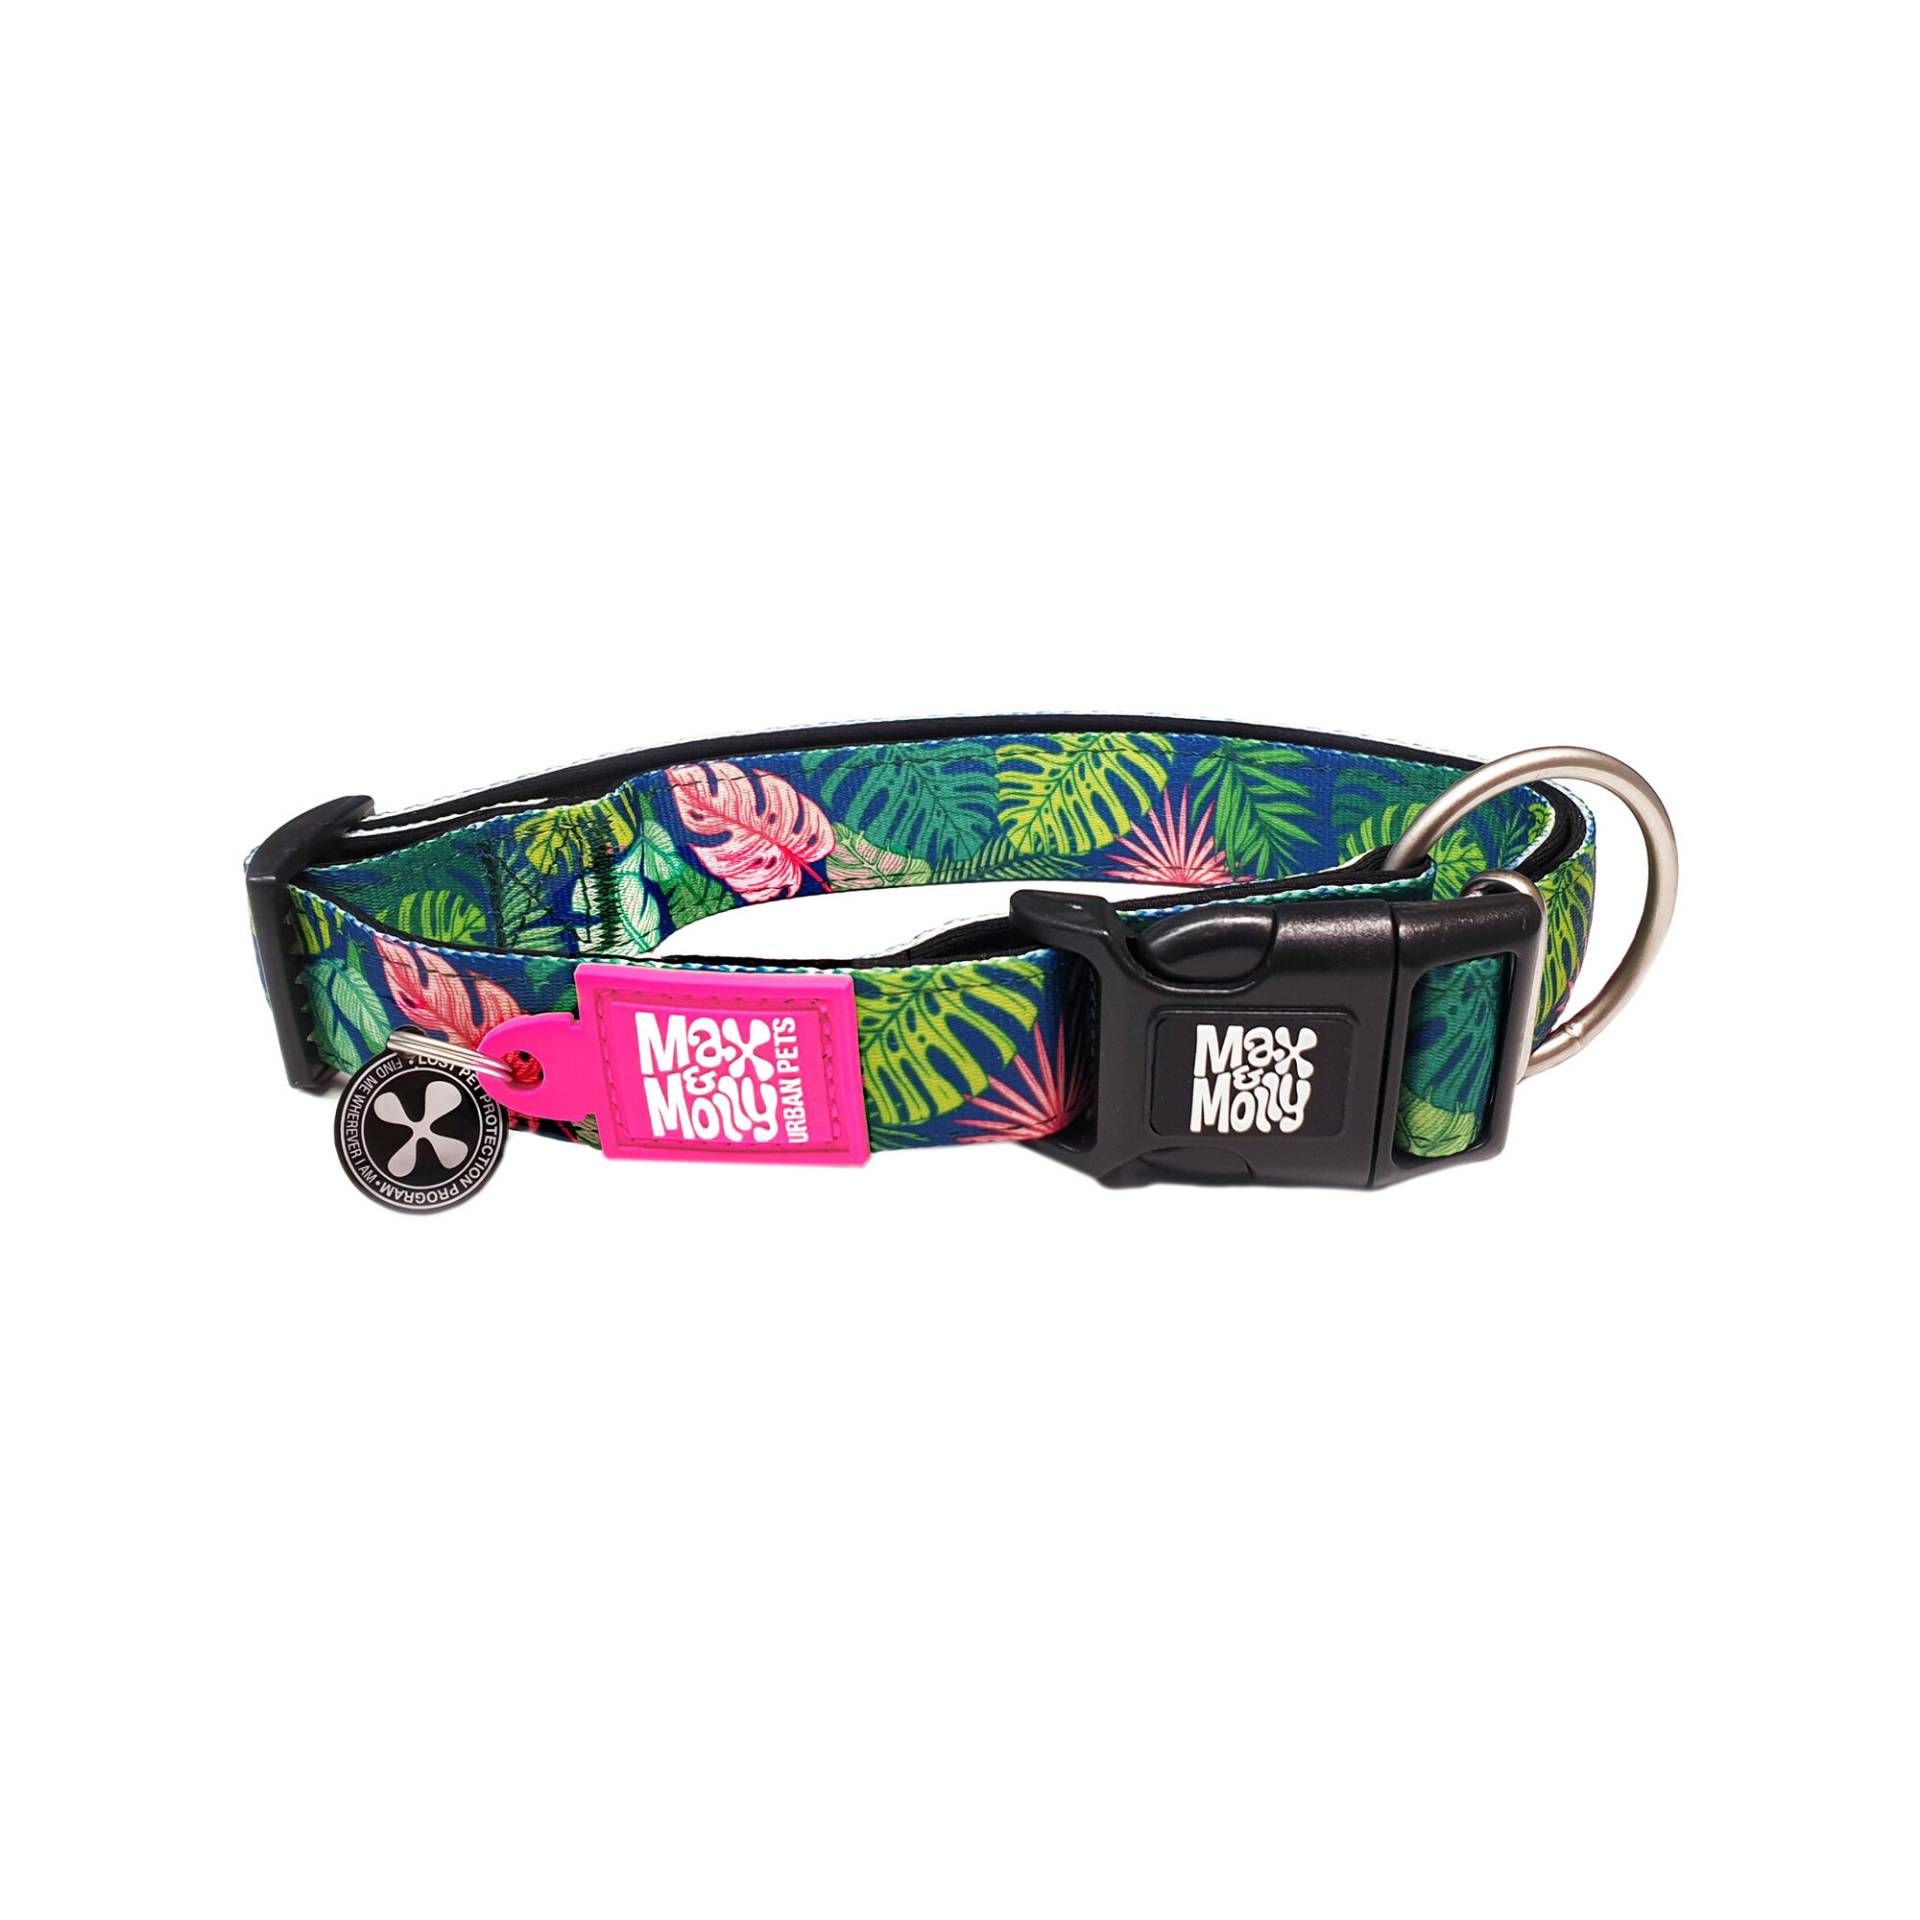 Max & Molly Smart ID Halsband - Tropical - XS von Max & Molly